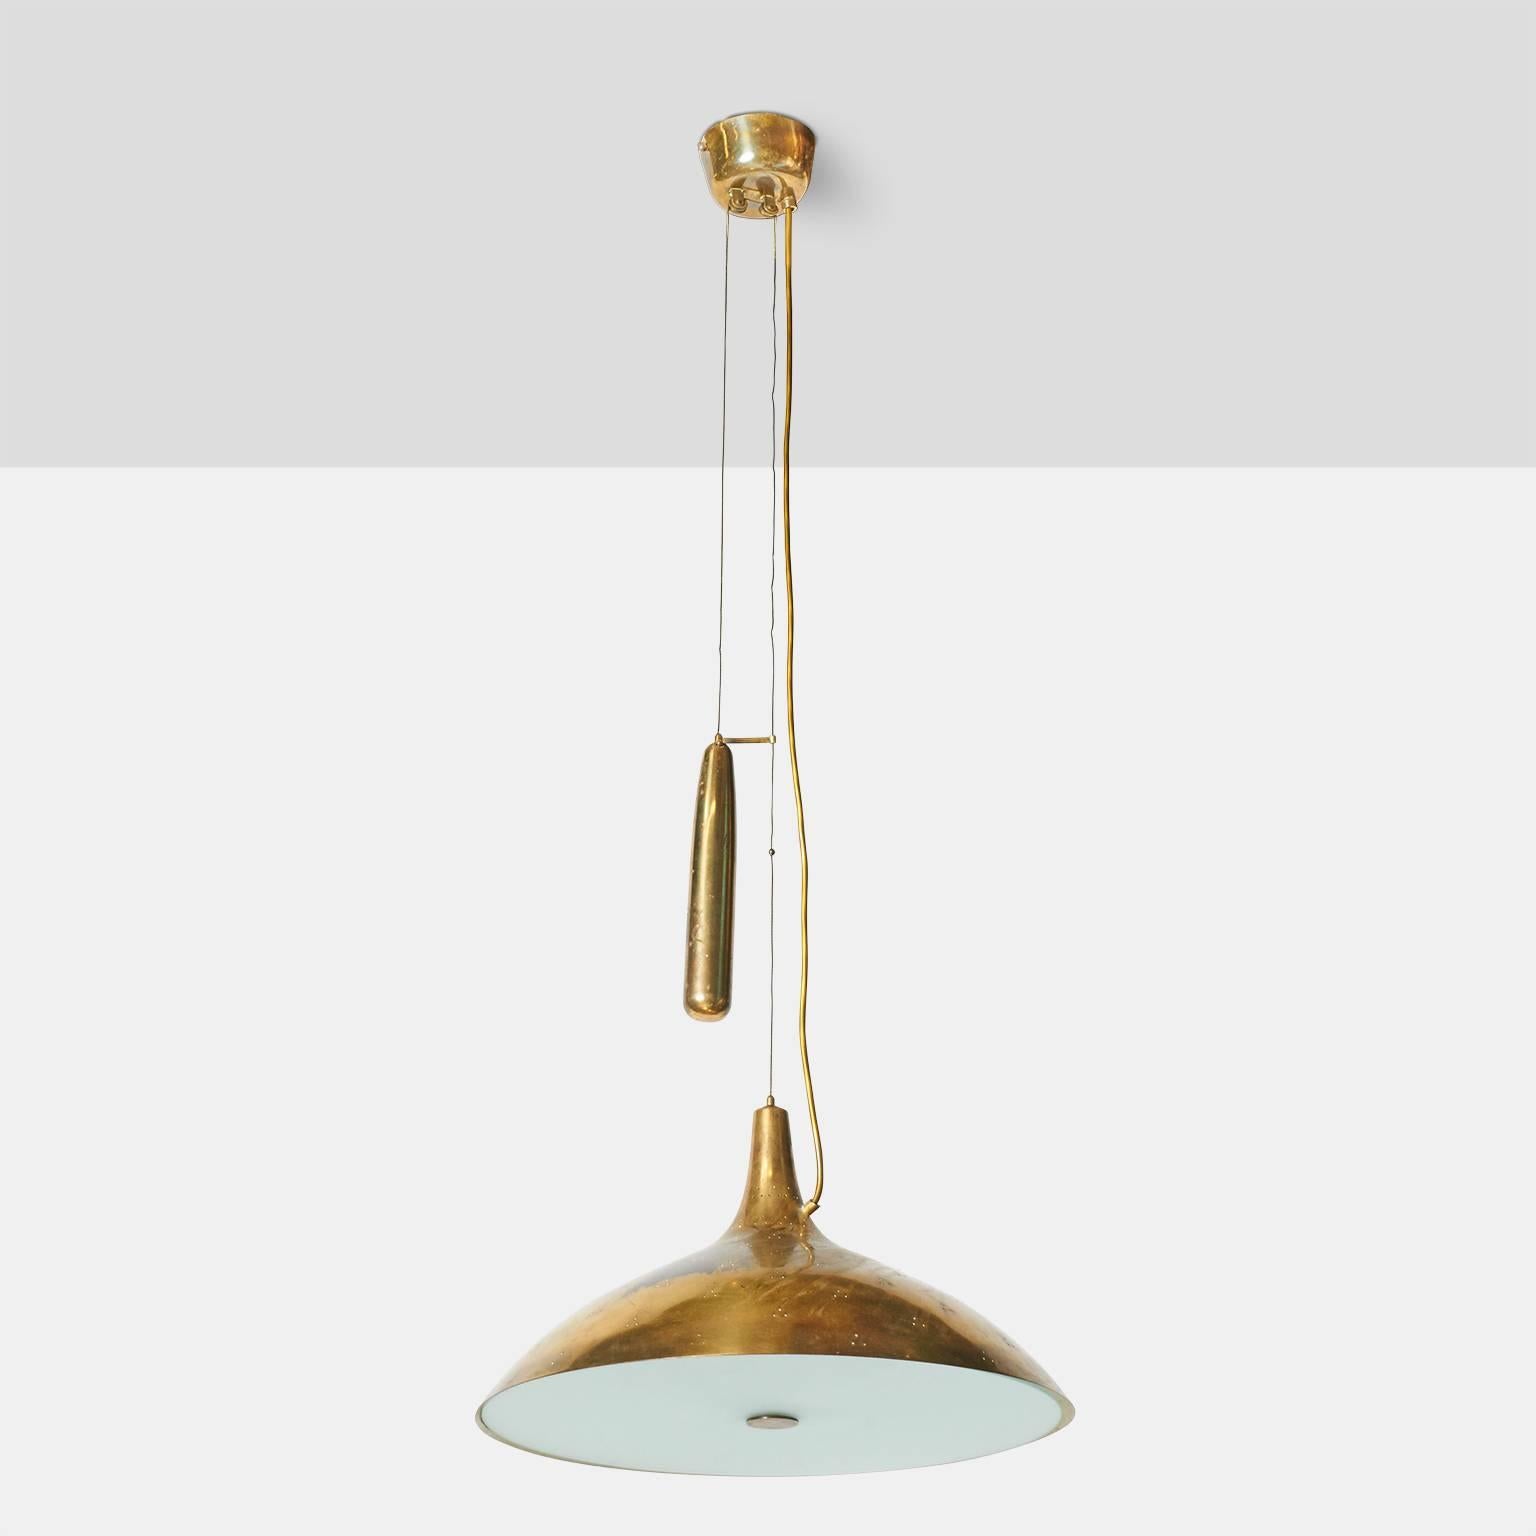 A large-scale counter weight chandelier by Paavo Tynell for Taito Oy. The perforated shade is in brass with a frosted glass diffuser and brass weight for adjusting the overall length,
Finland, circa 1950s.